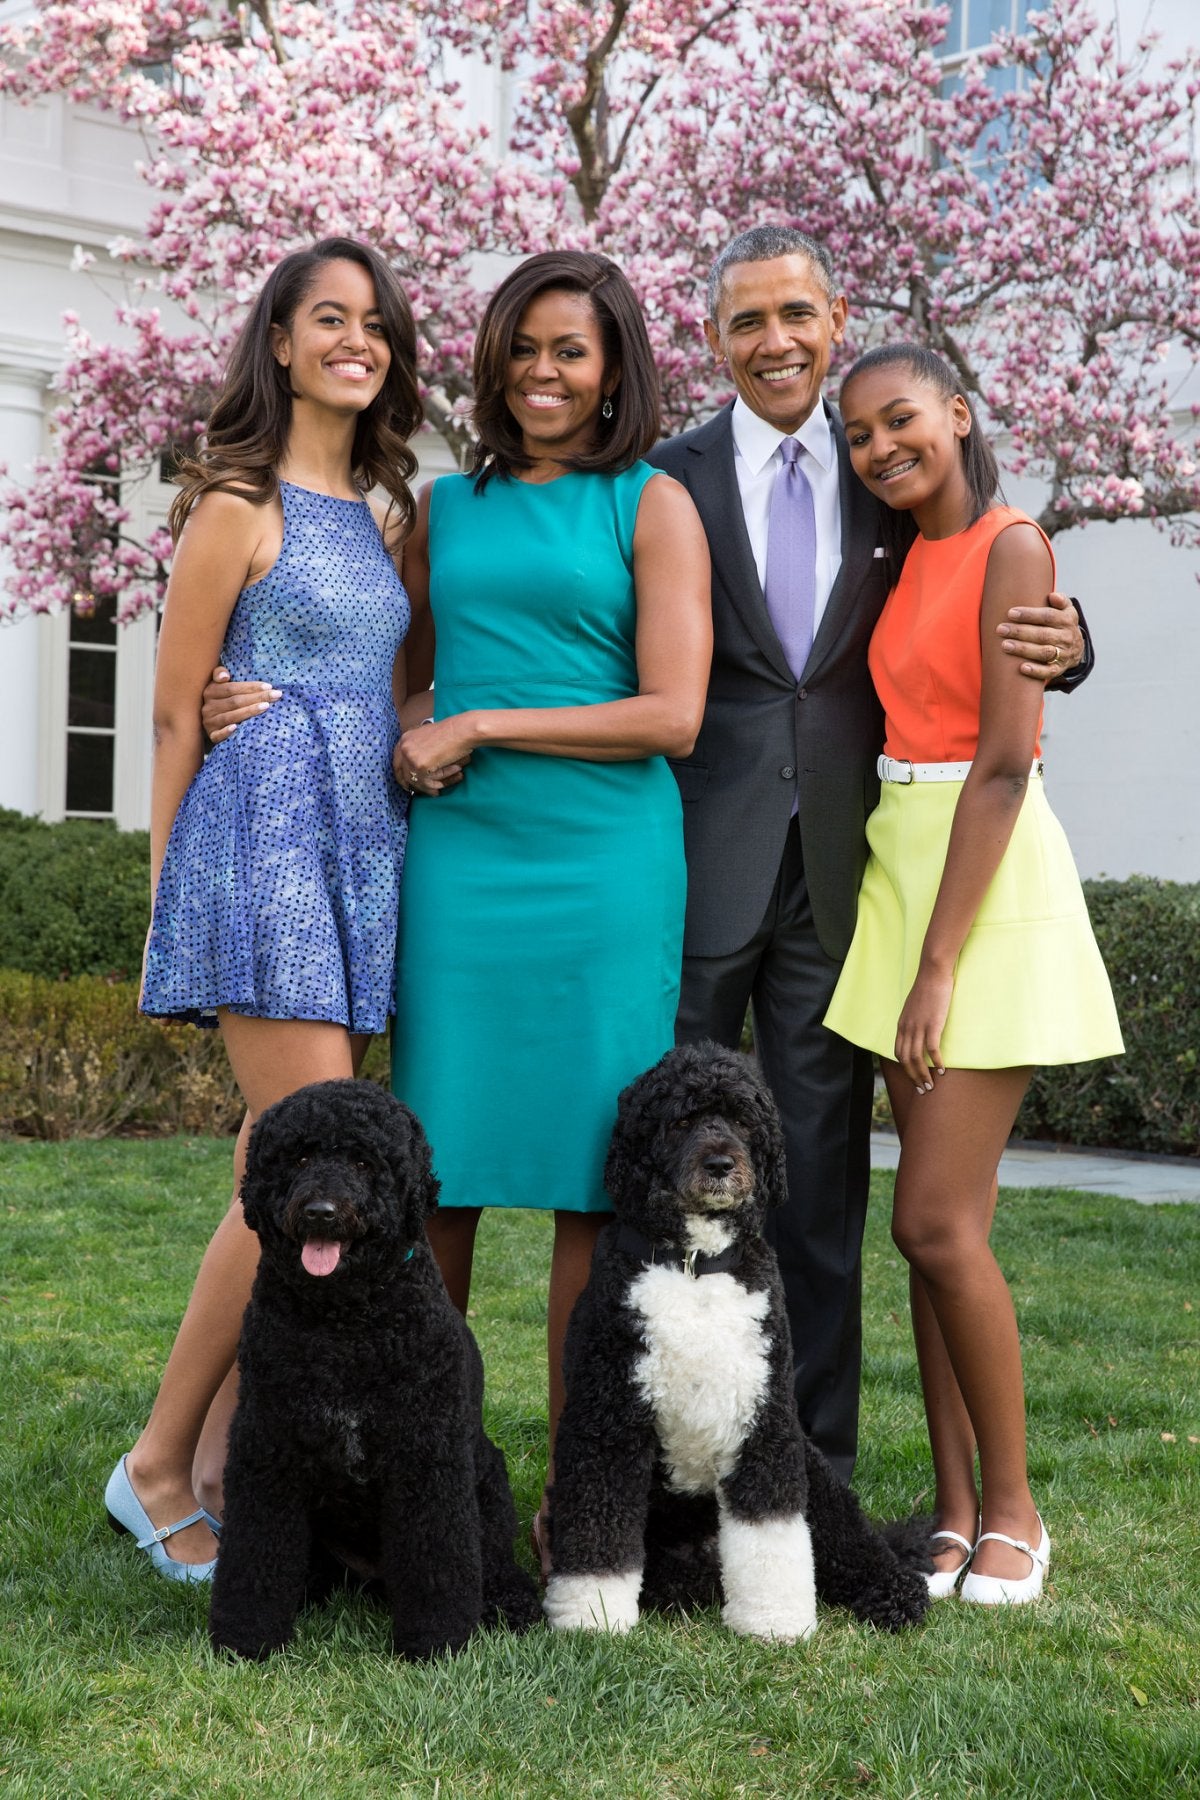 Take a Look Inside the Obamas' Gorgeous Post-White House Home in Washington, D.C.
